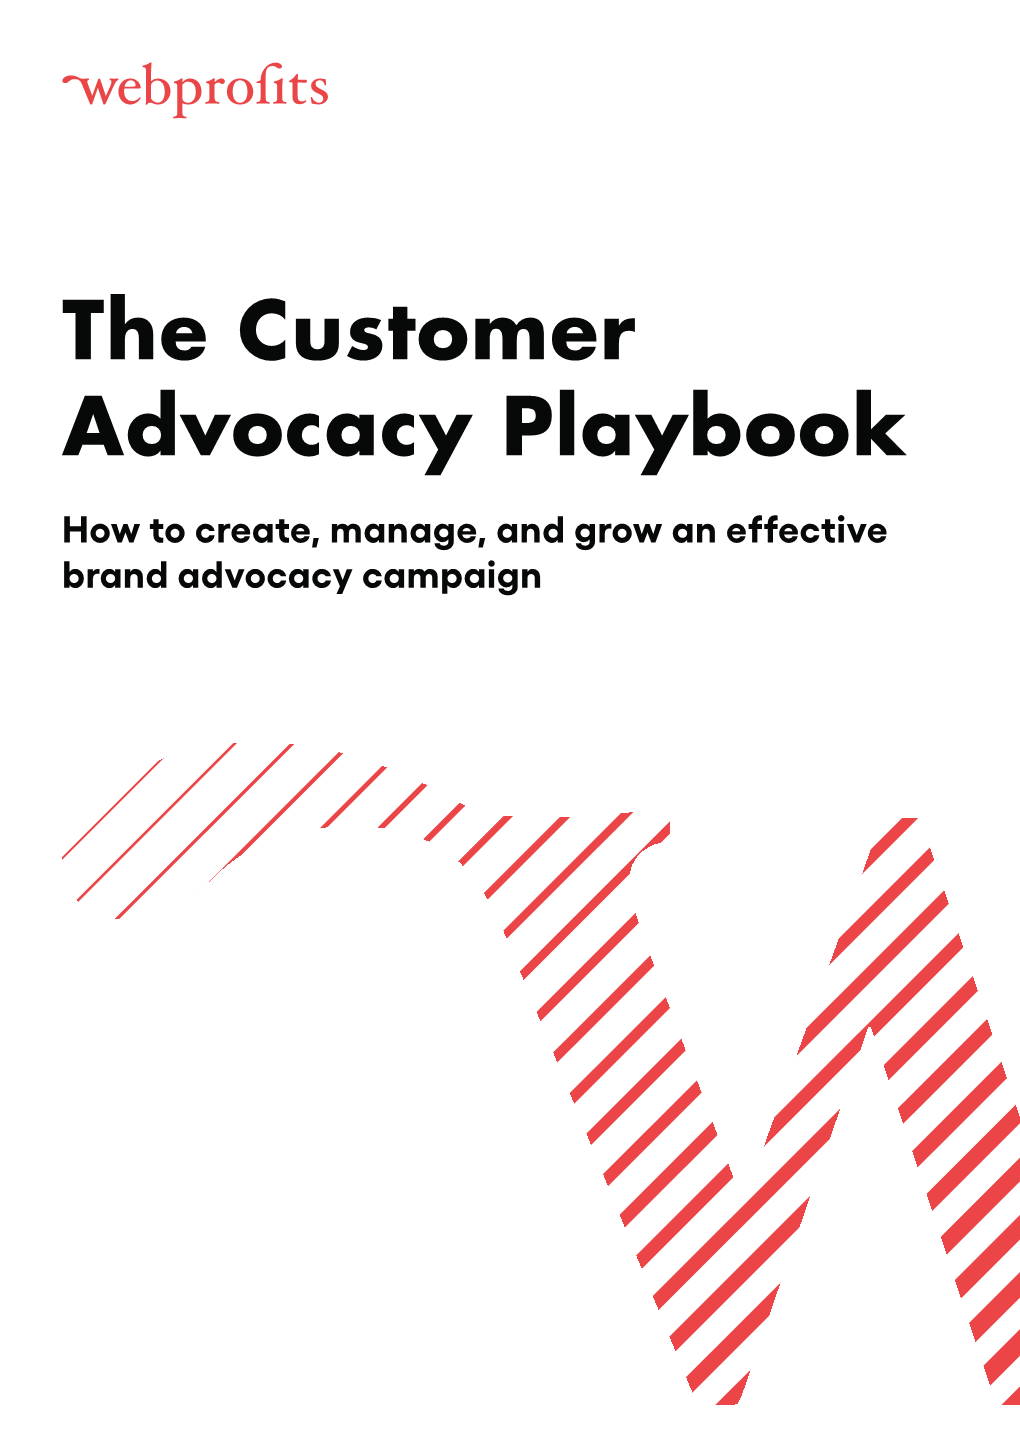 The Customer Advocacy Playbook